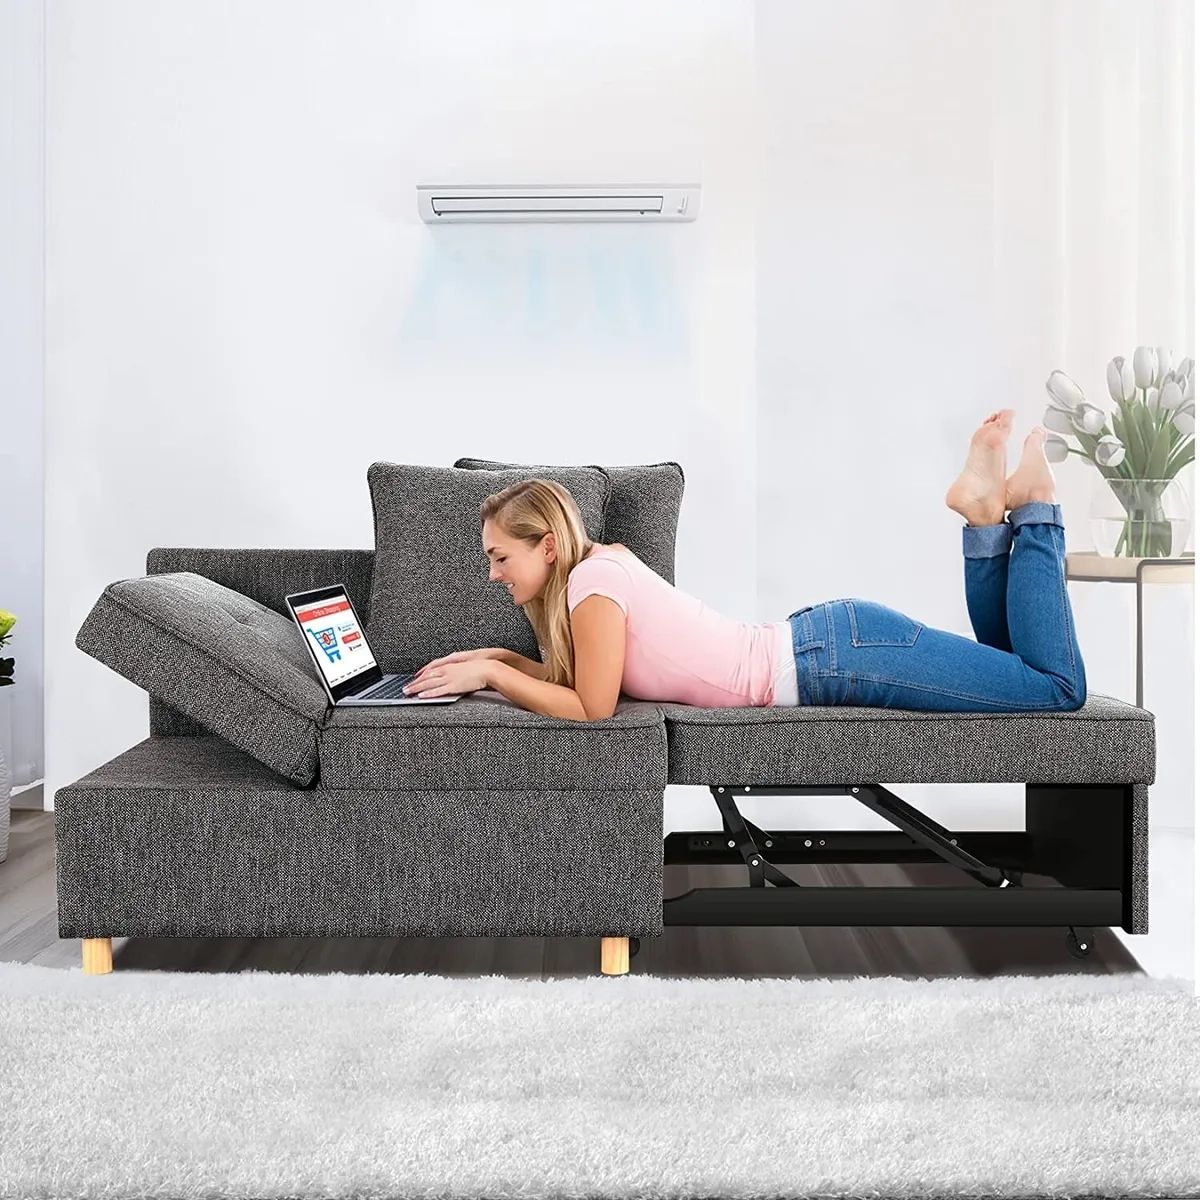 ⭐folding Ottoman Sofa Bed Convertible Chair 4 In 1 Multi Function Sleeper  Sofa~⭐ | Ebay With Regard To 4 In 1 Convertible Sleeper Chair Beds (Photo 6 of 15)